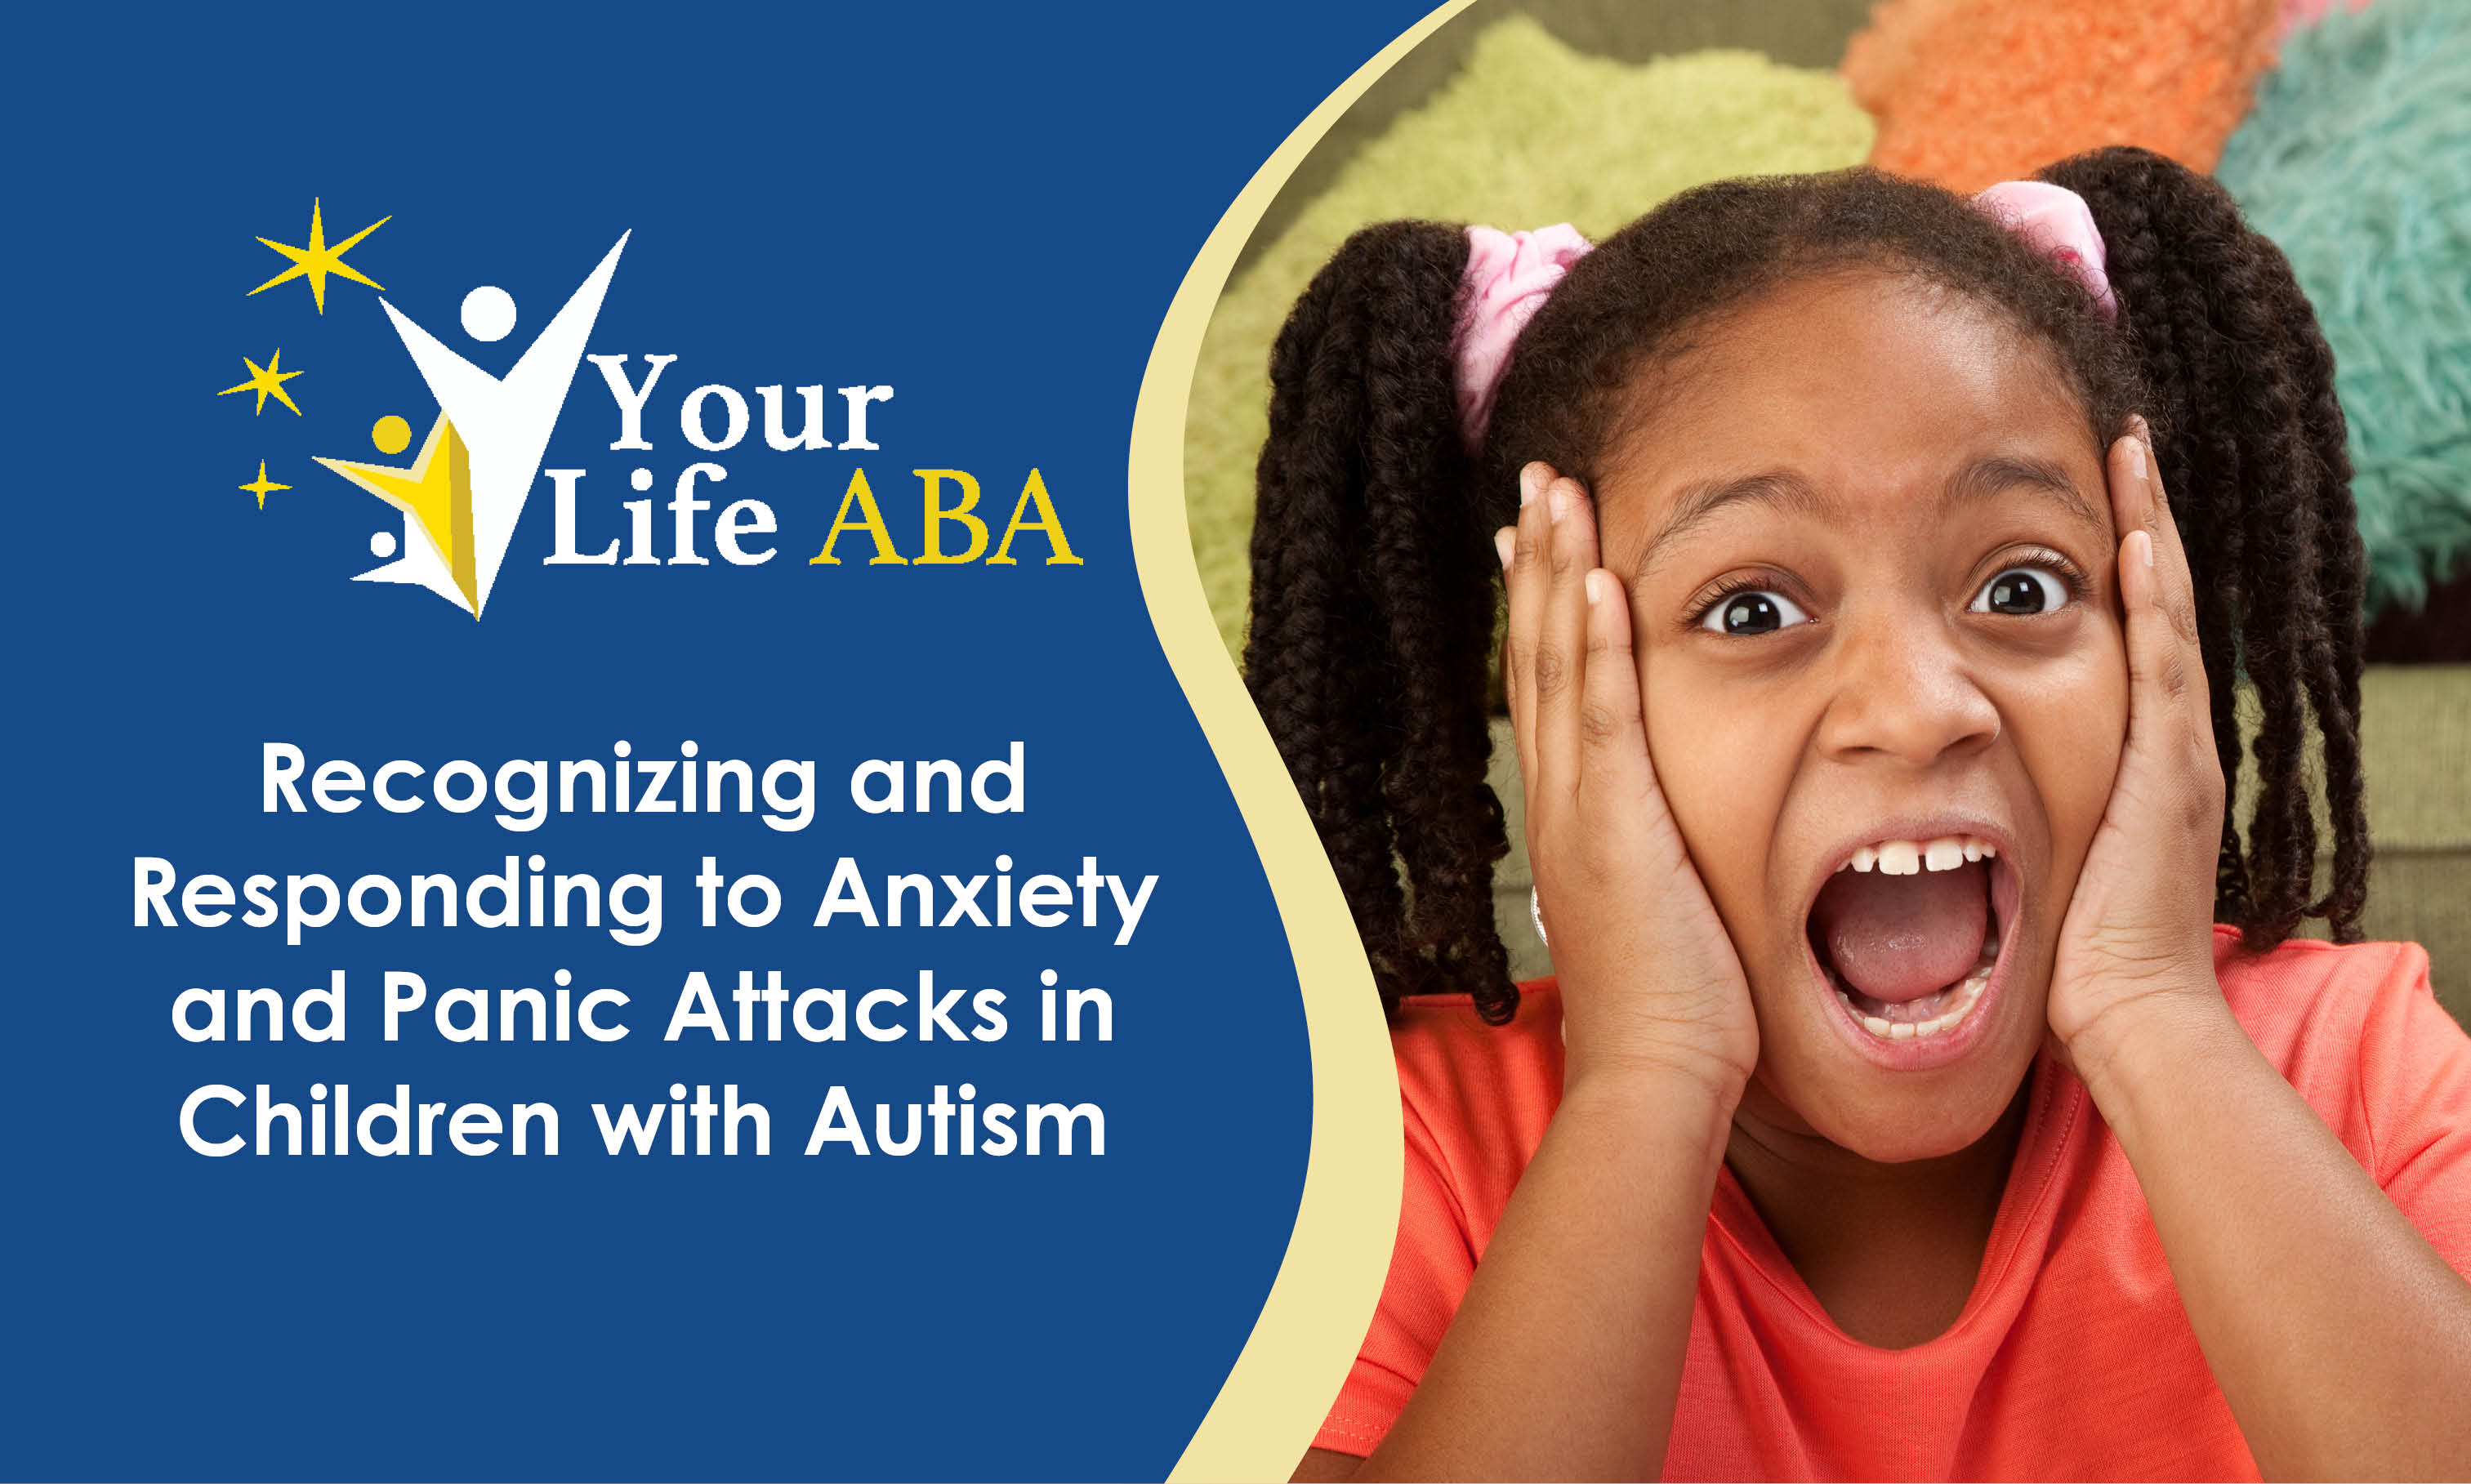 Recognizing and Responding to Anxiety and Panic Attacks in Children with Autism